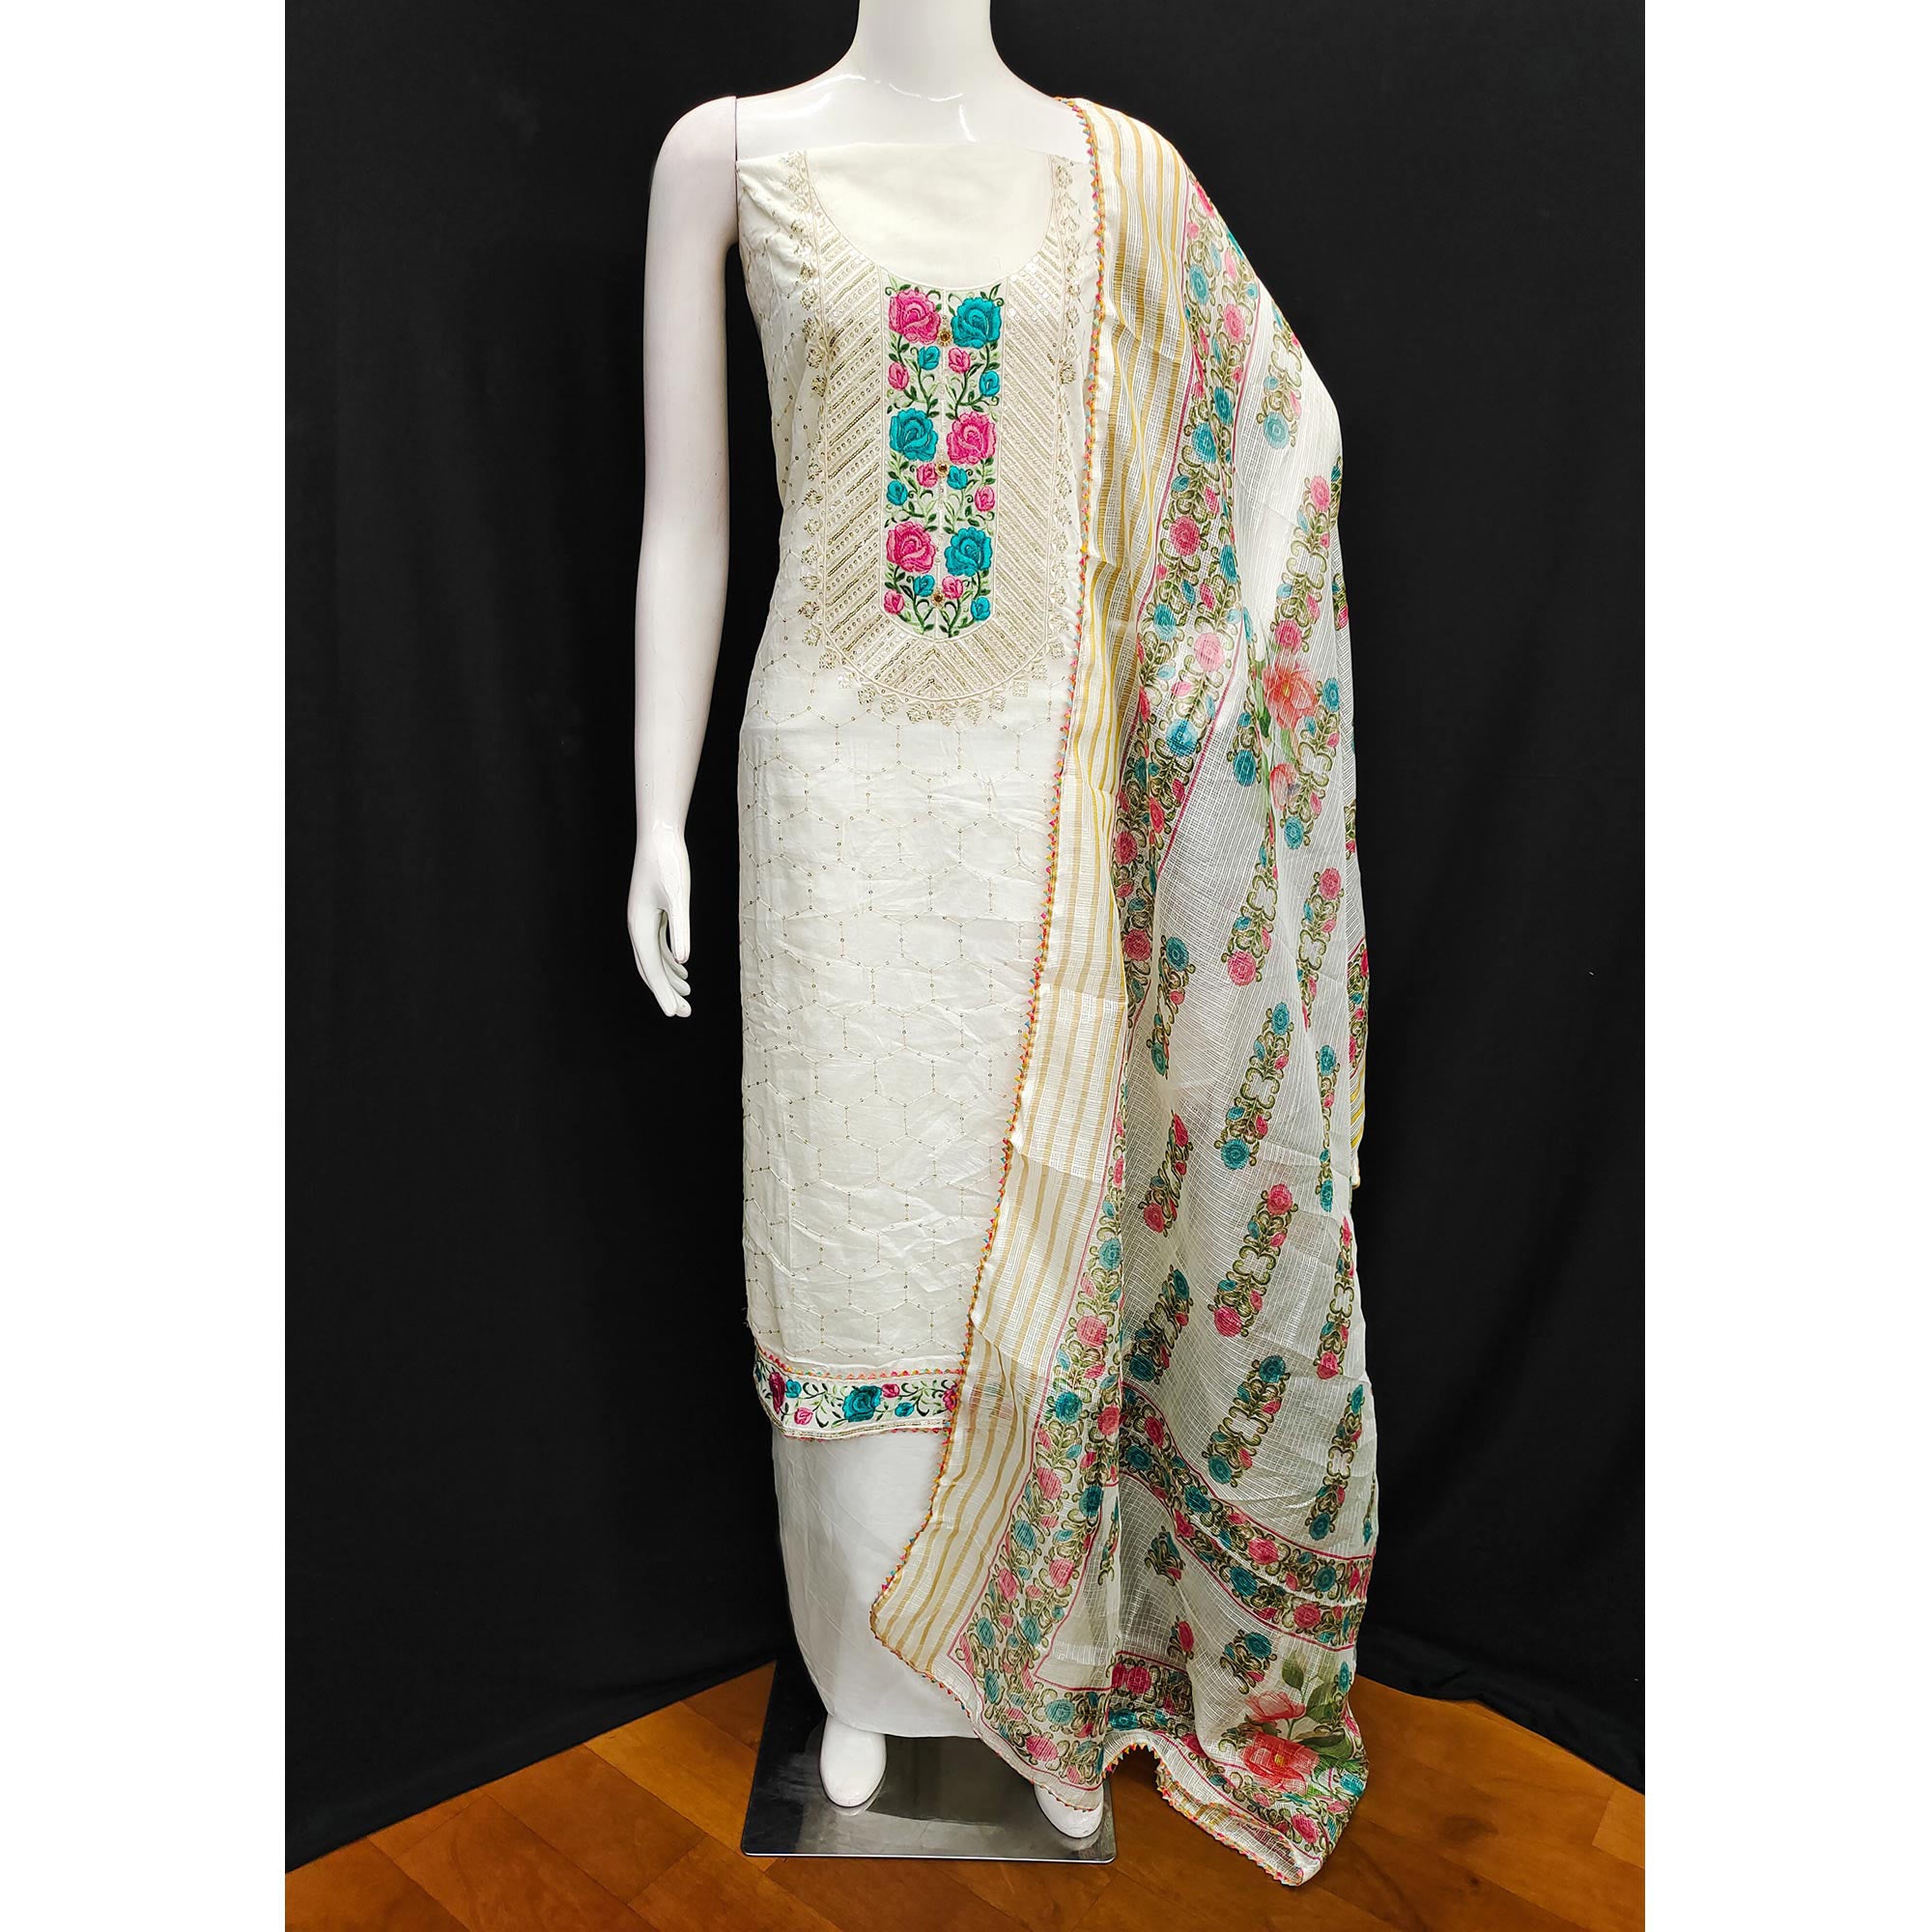 Off White & Pink Embroidered Chanderi Dress Material